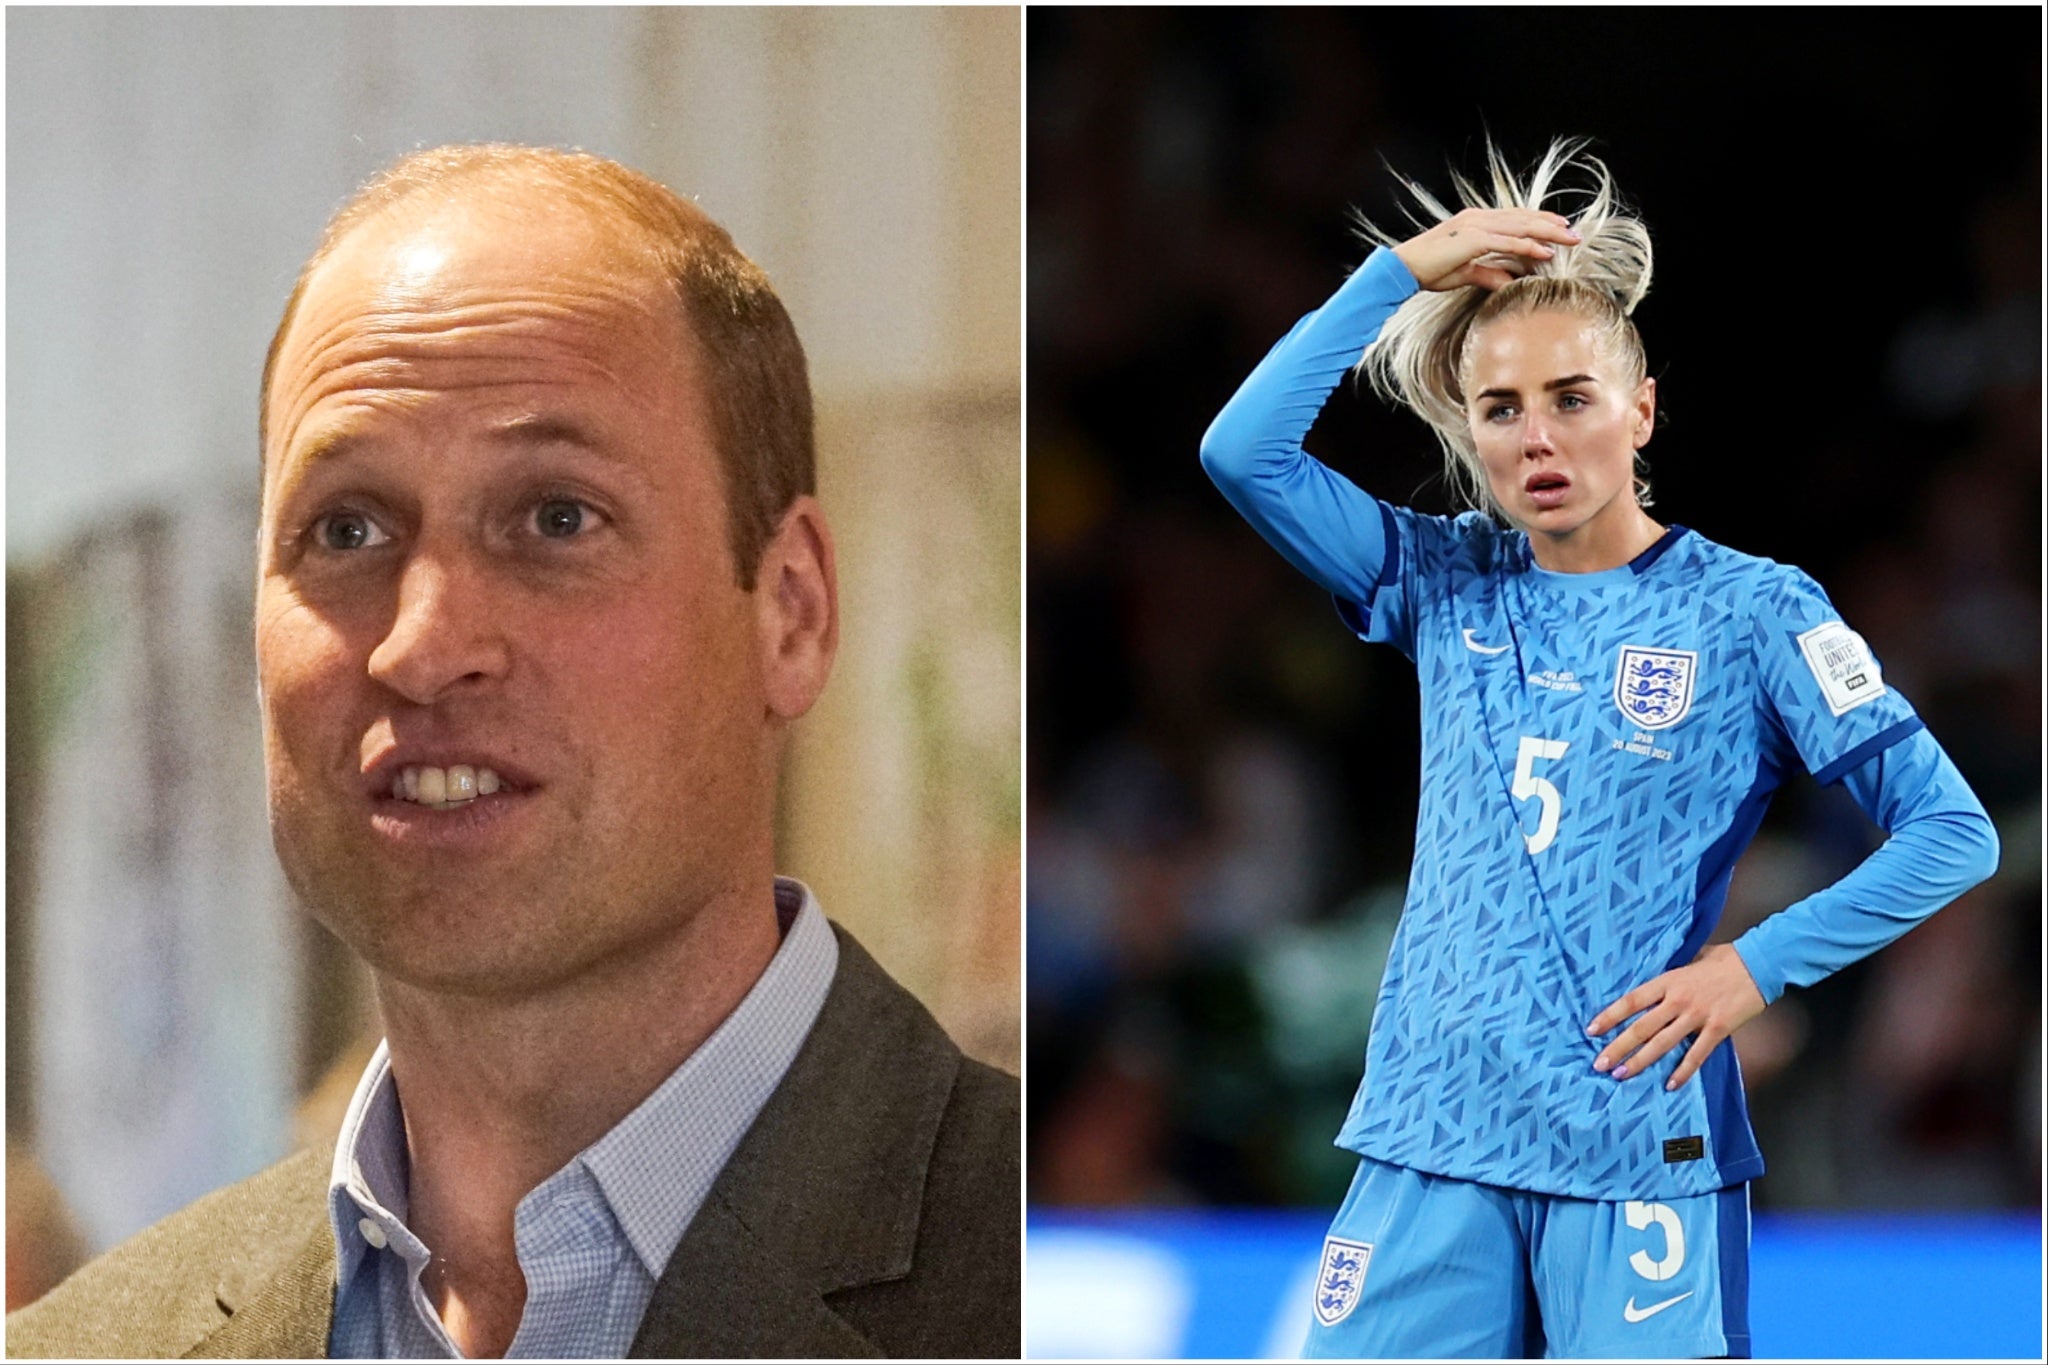 Prince William and England player Alex Greenwood